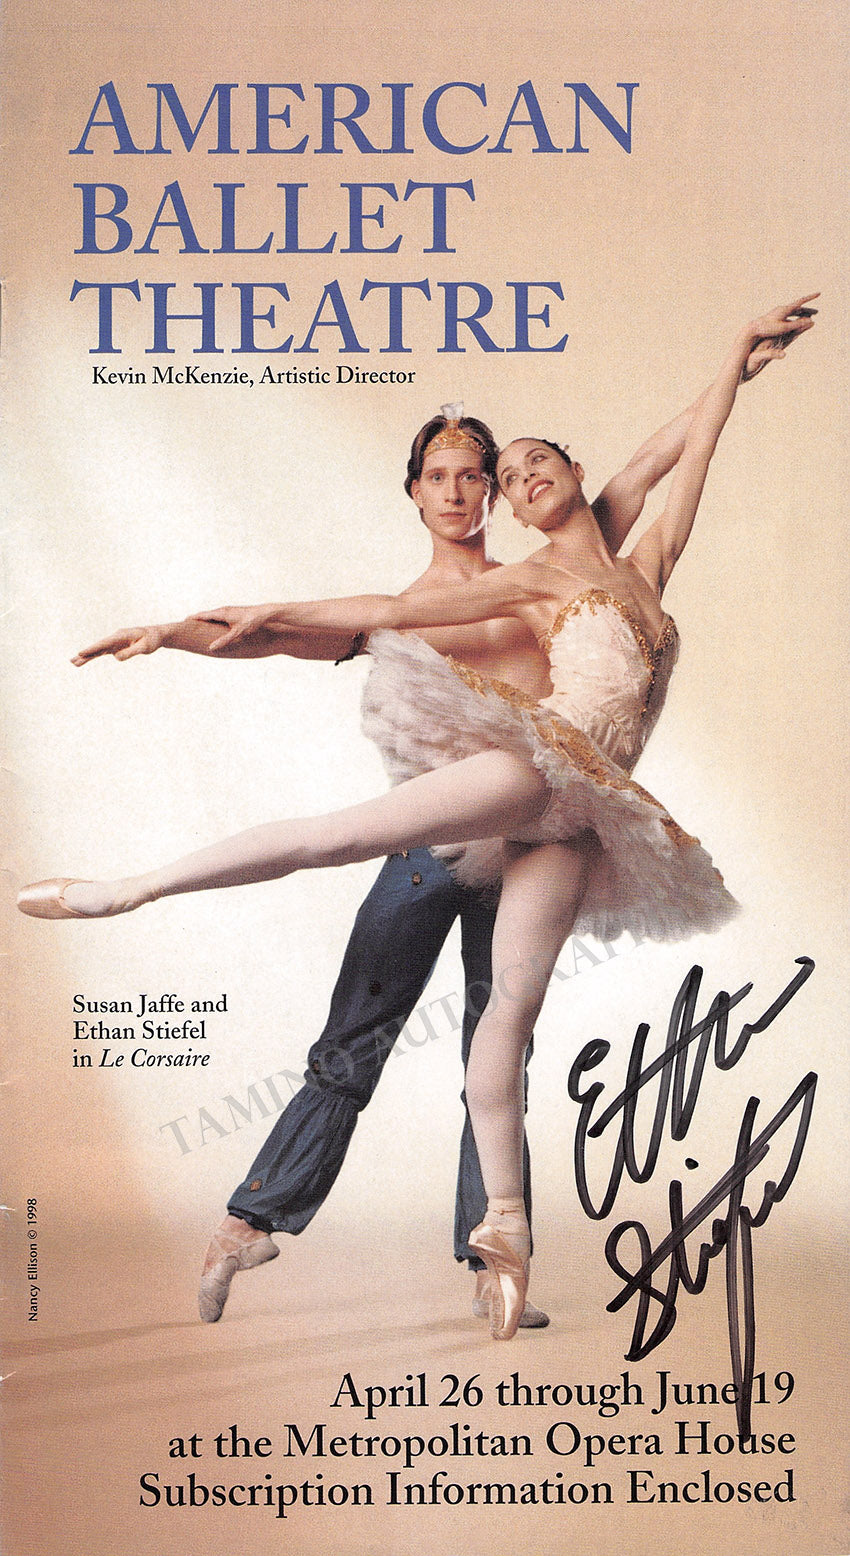 Stiefel, Ethan - Signed Program American Ballet Theatre